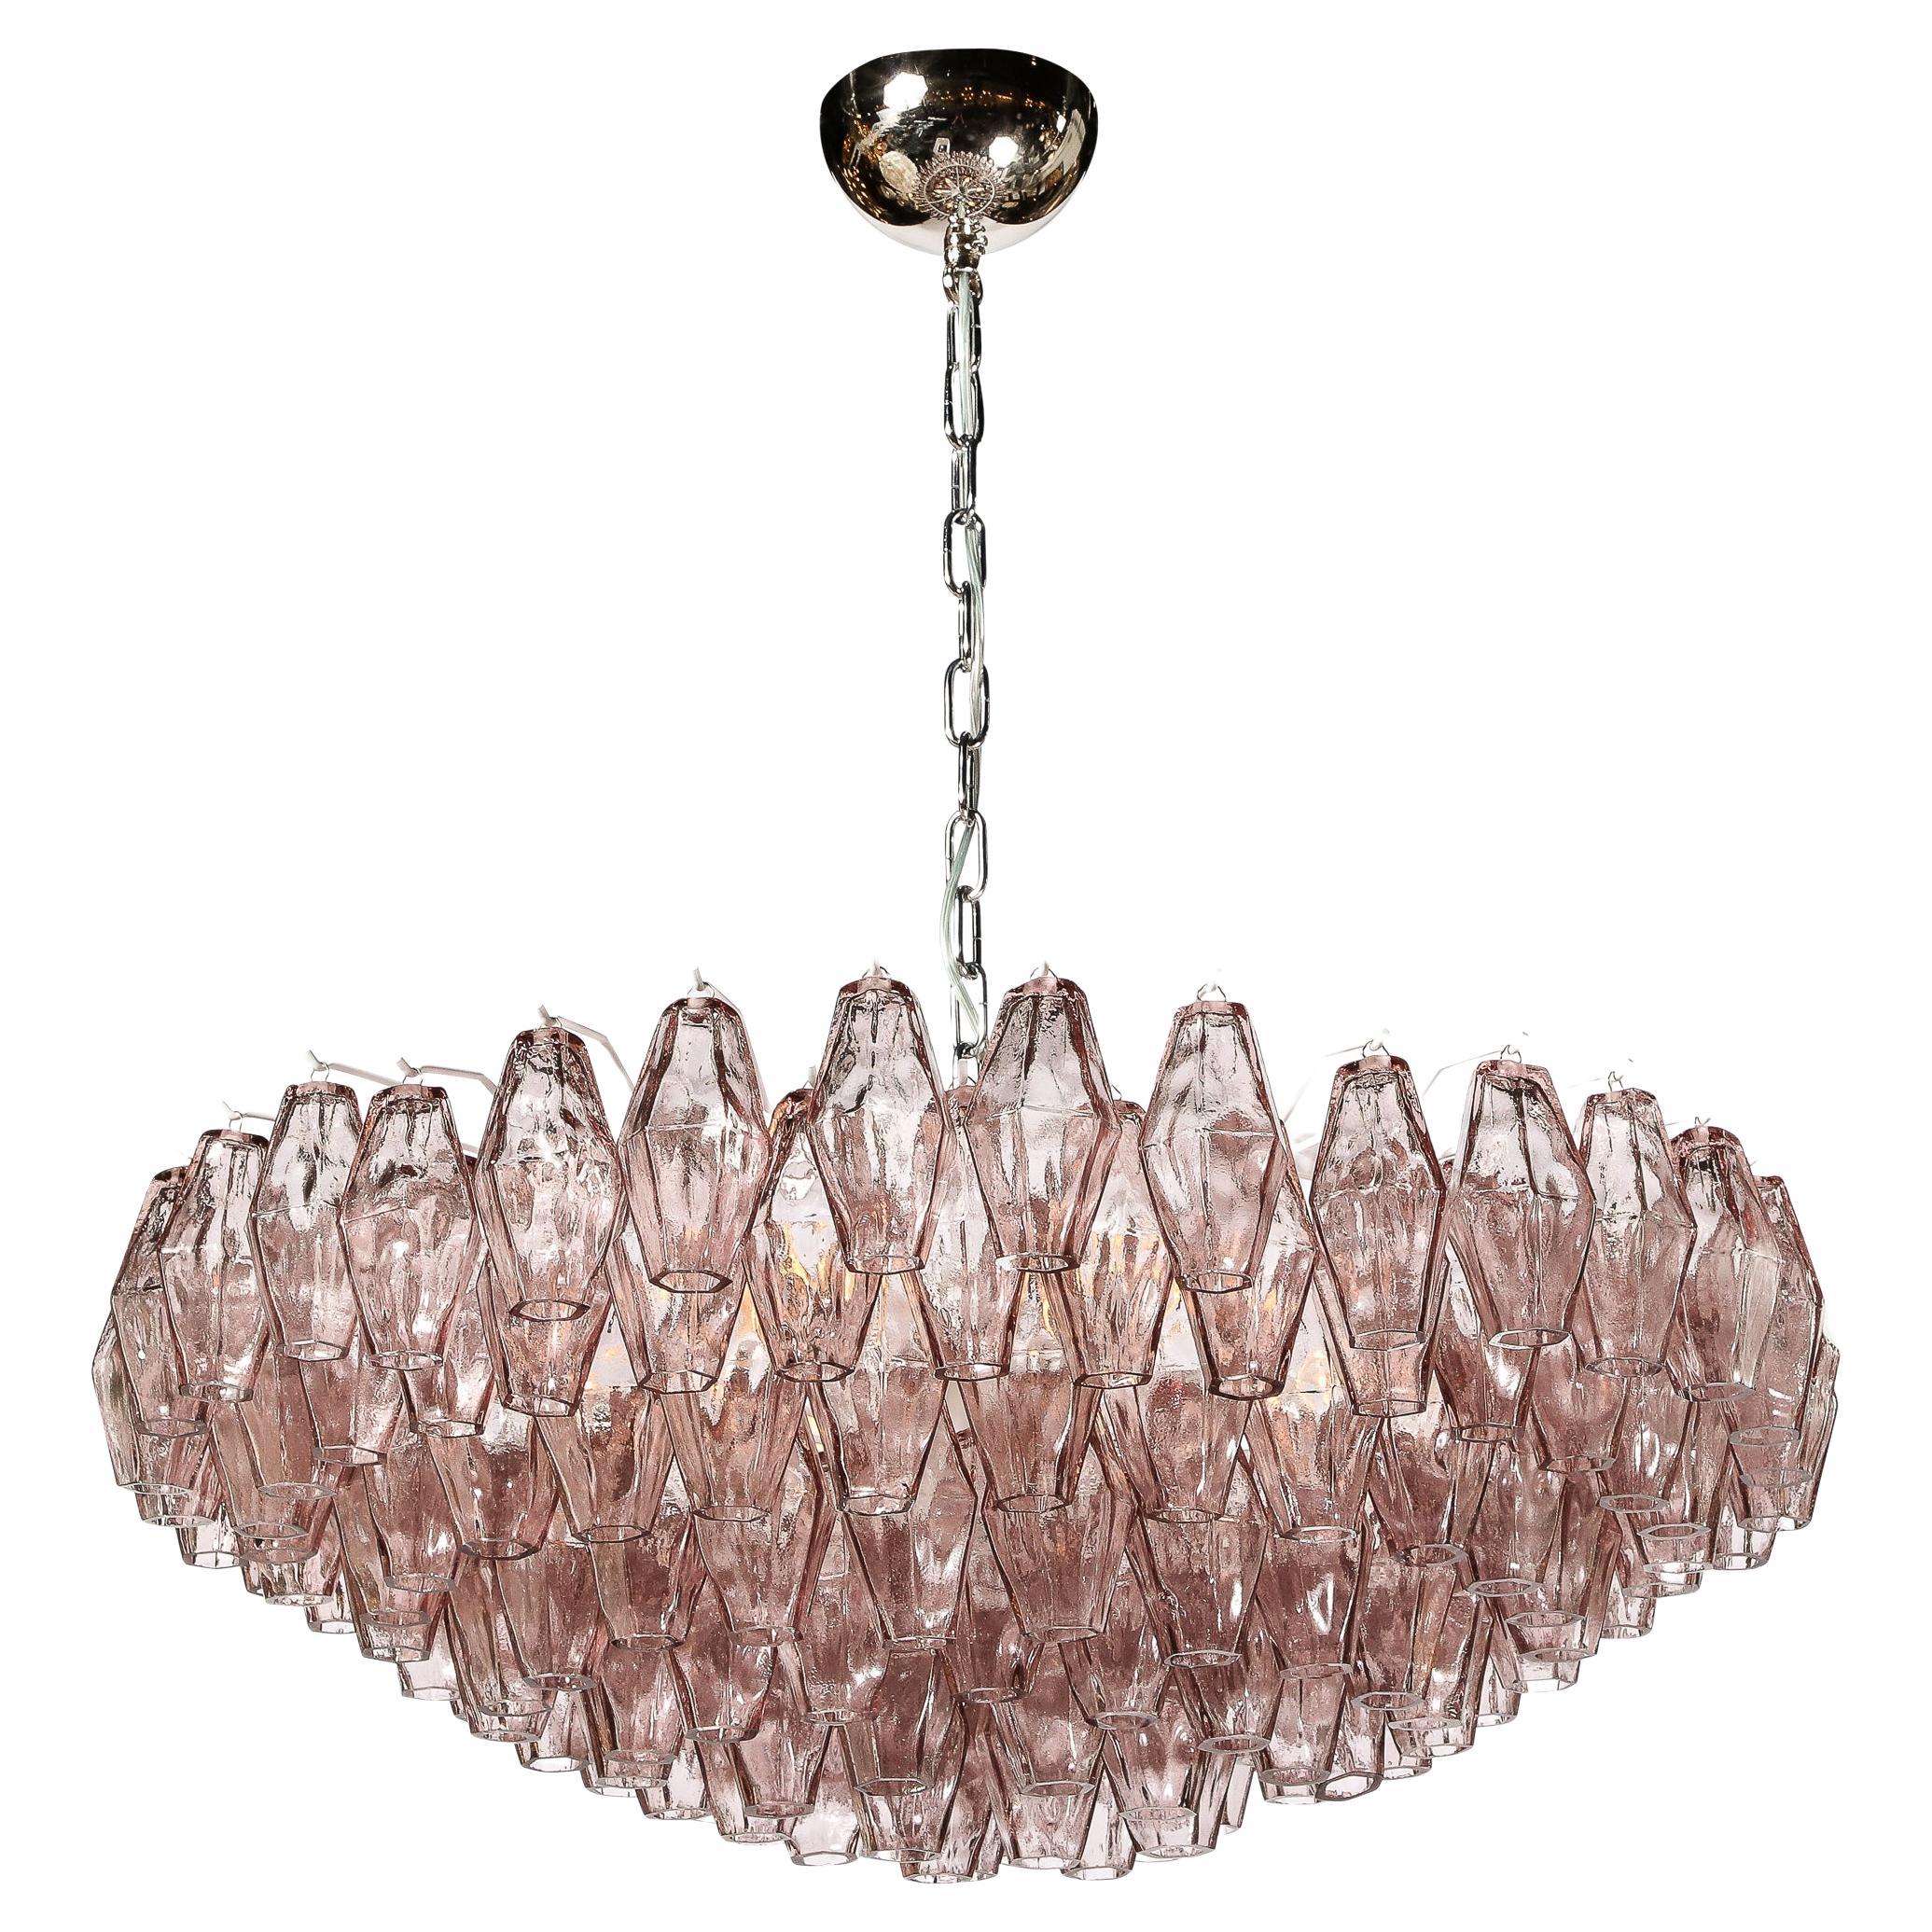 Hand-Blown Murano Glass Polyhedral Chandelier in Smoked Amethyst